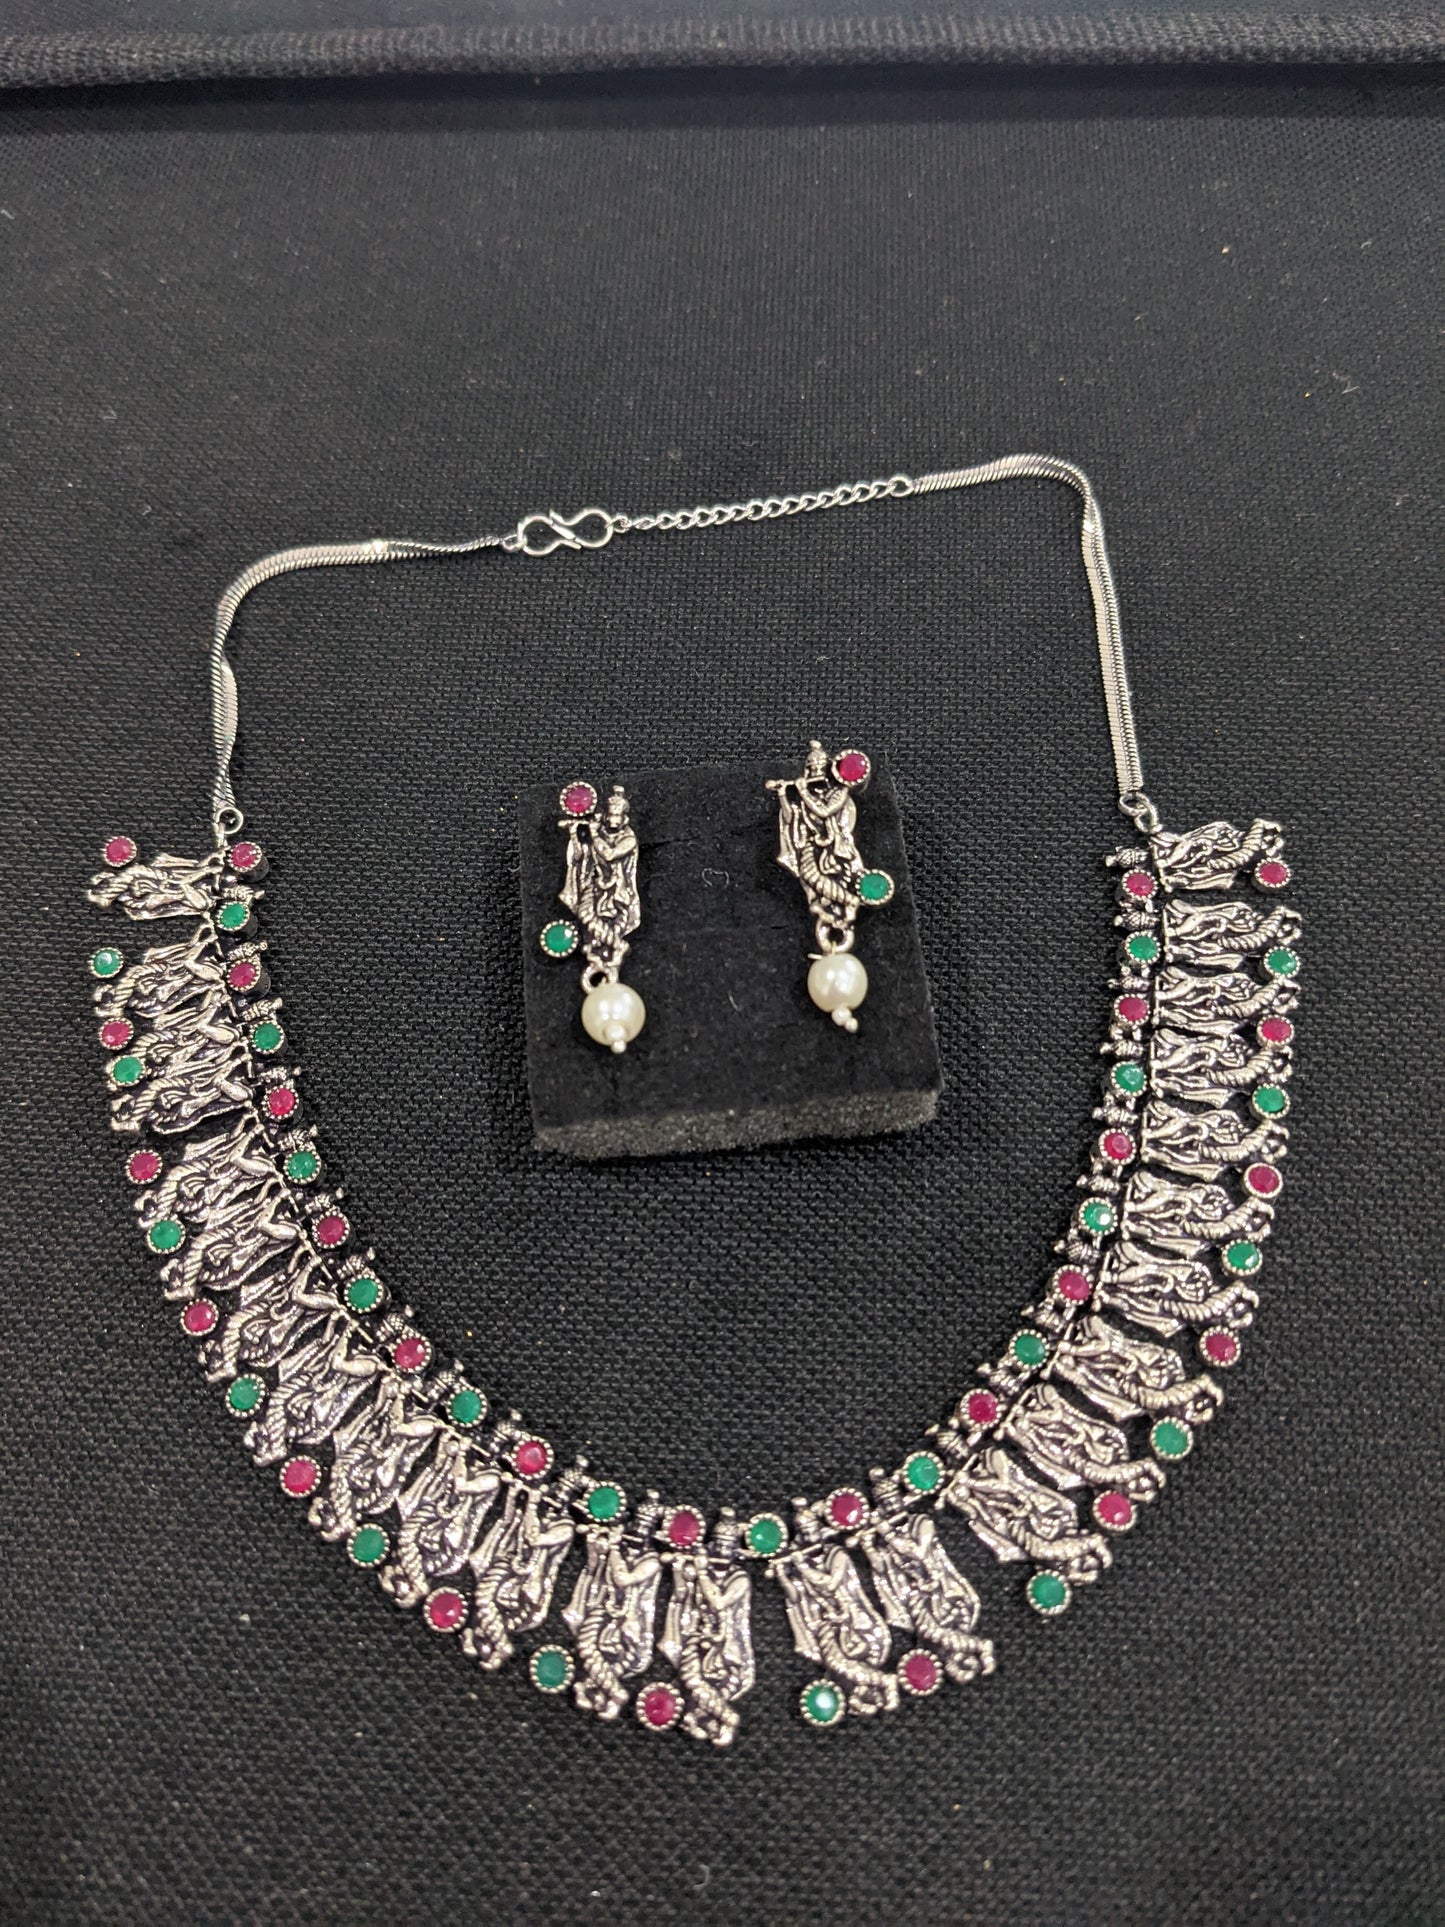 Oxidized Silver Lord Krishna Choker Necklace and Earring set